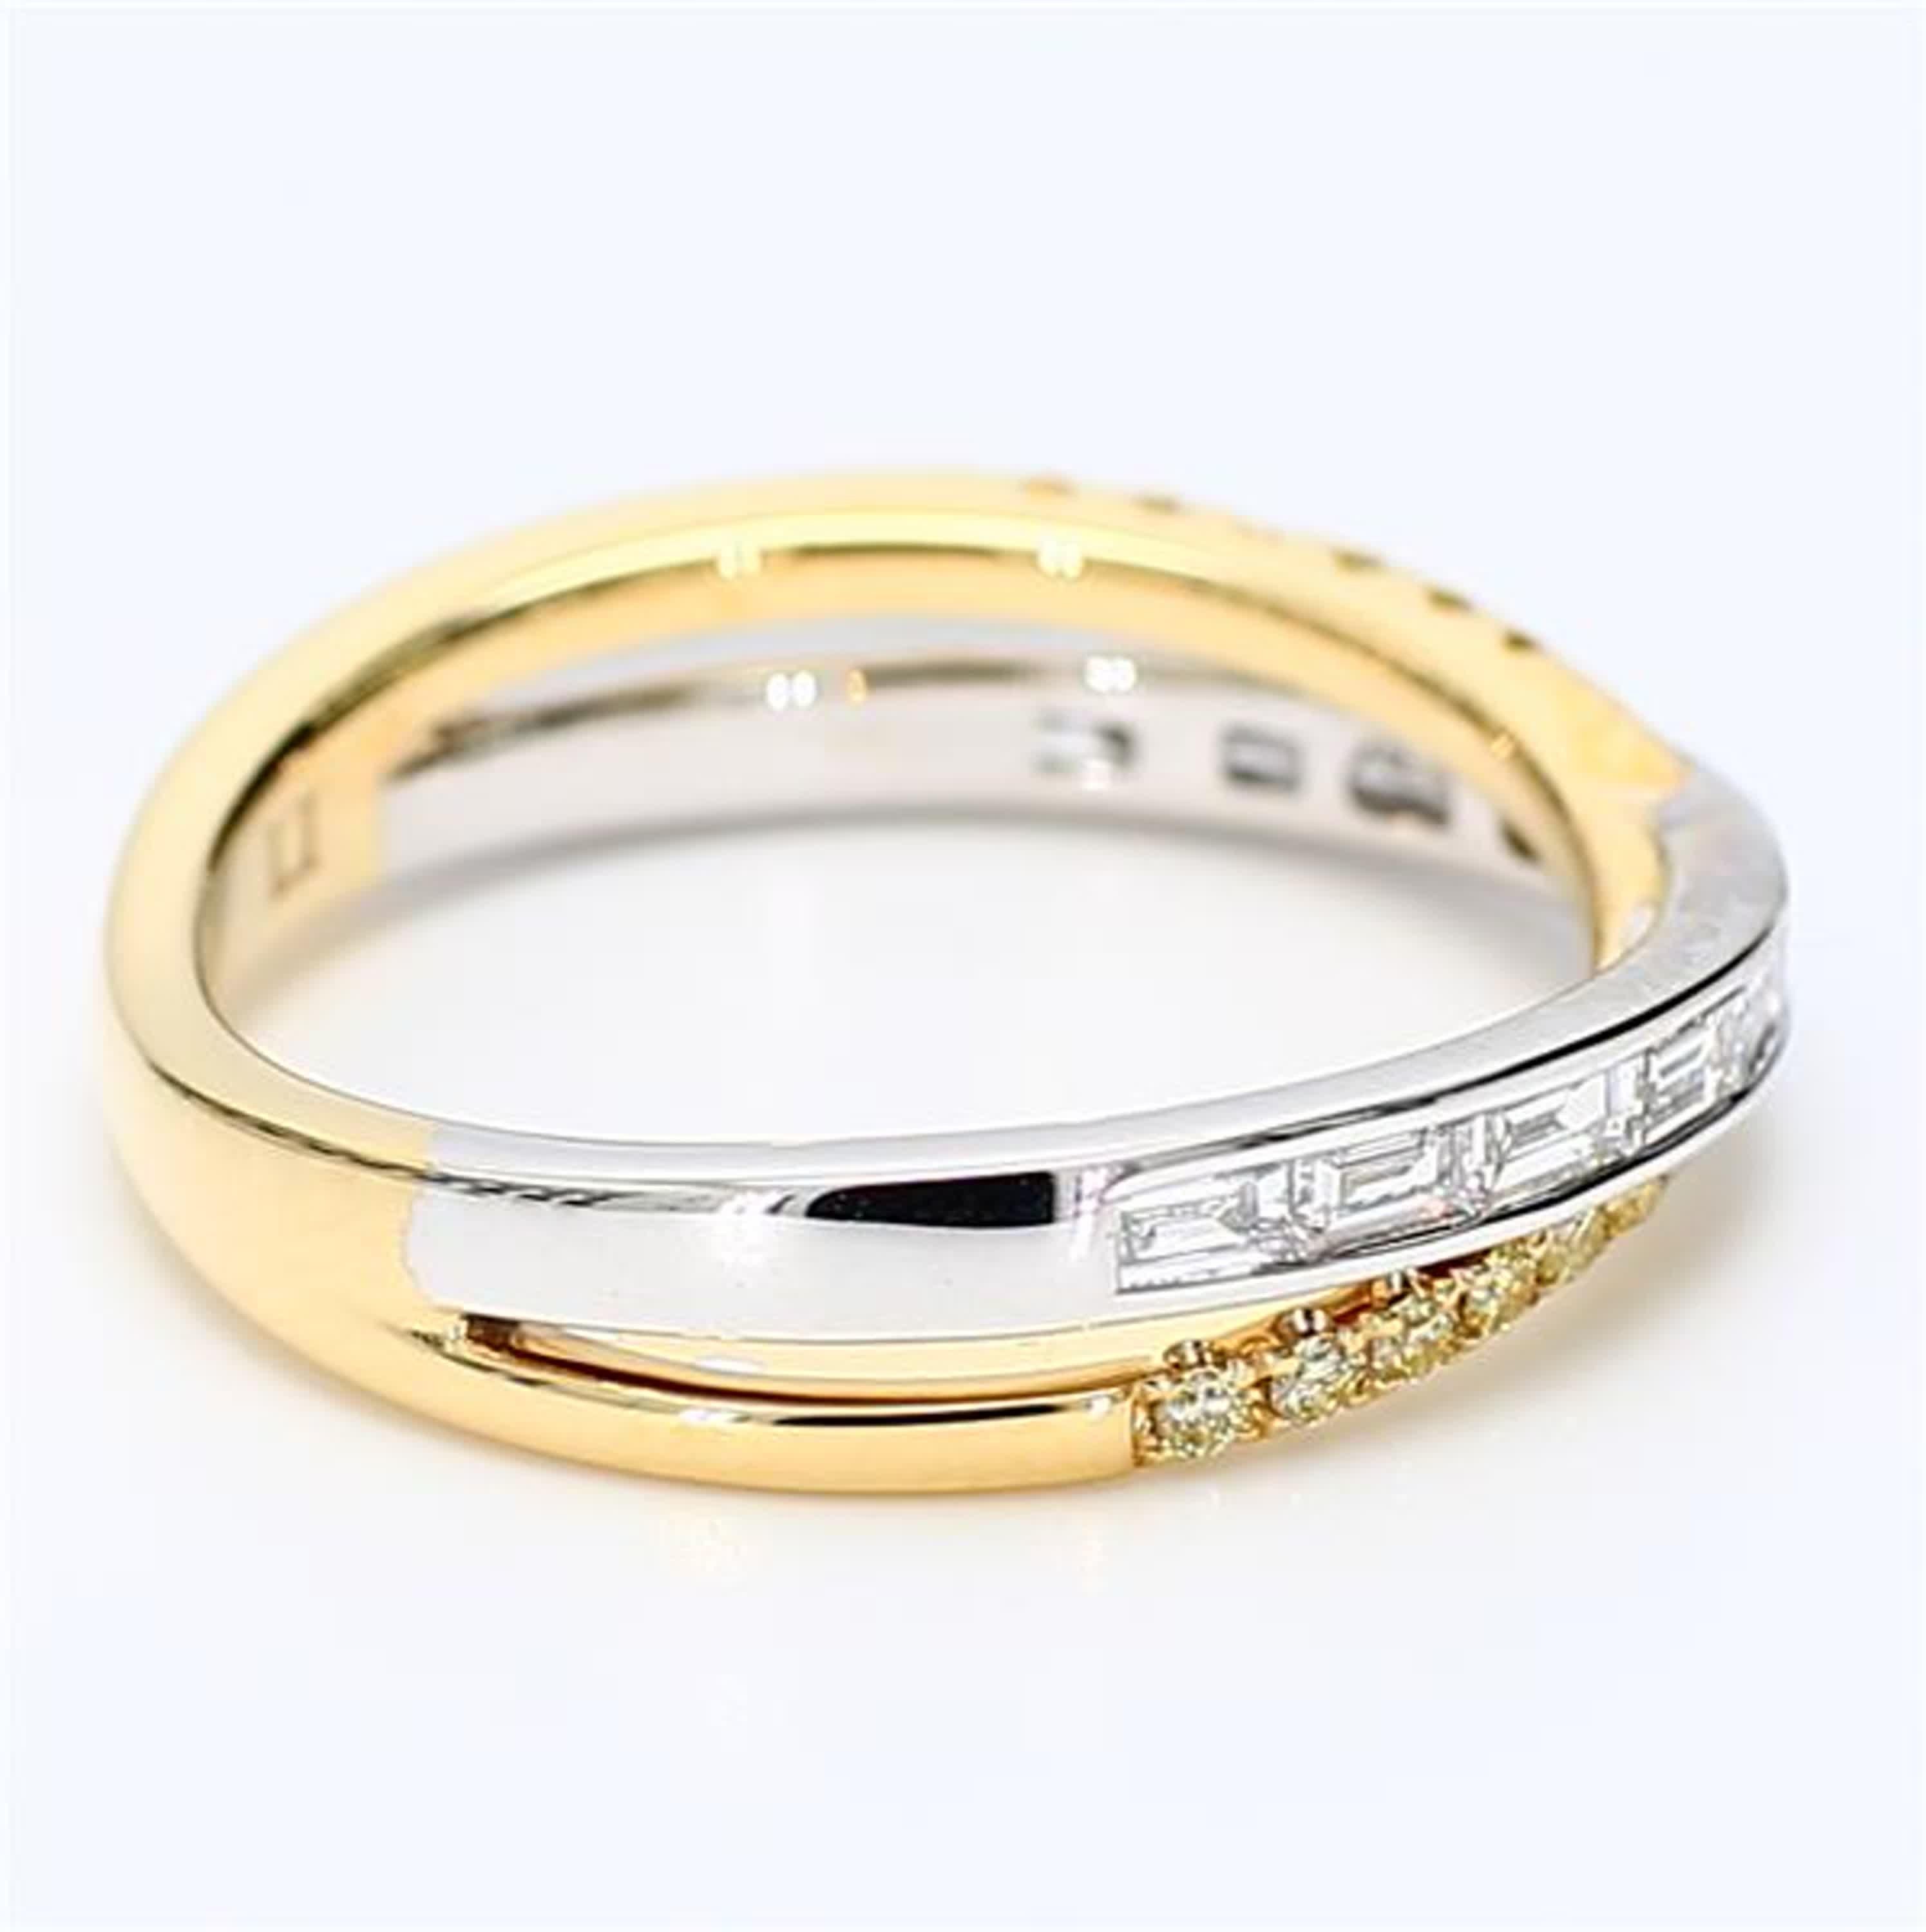 Women's Natural White Baguette and Yellow Diamond .48 Carat TW Gold Wedding Band For Sale